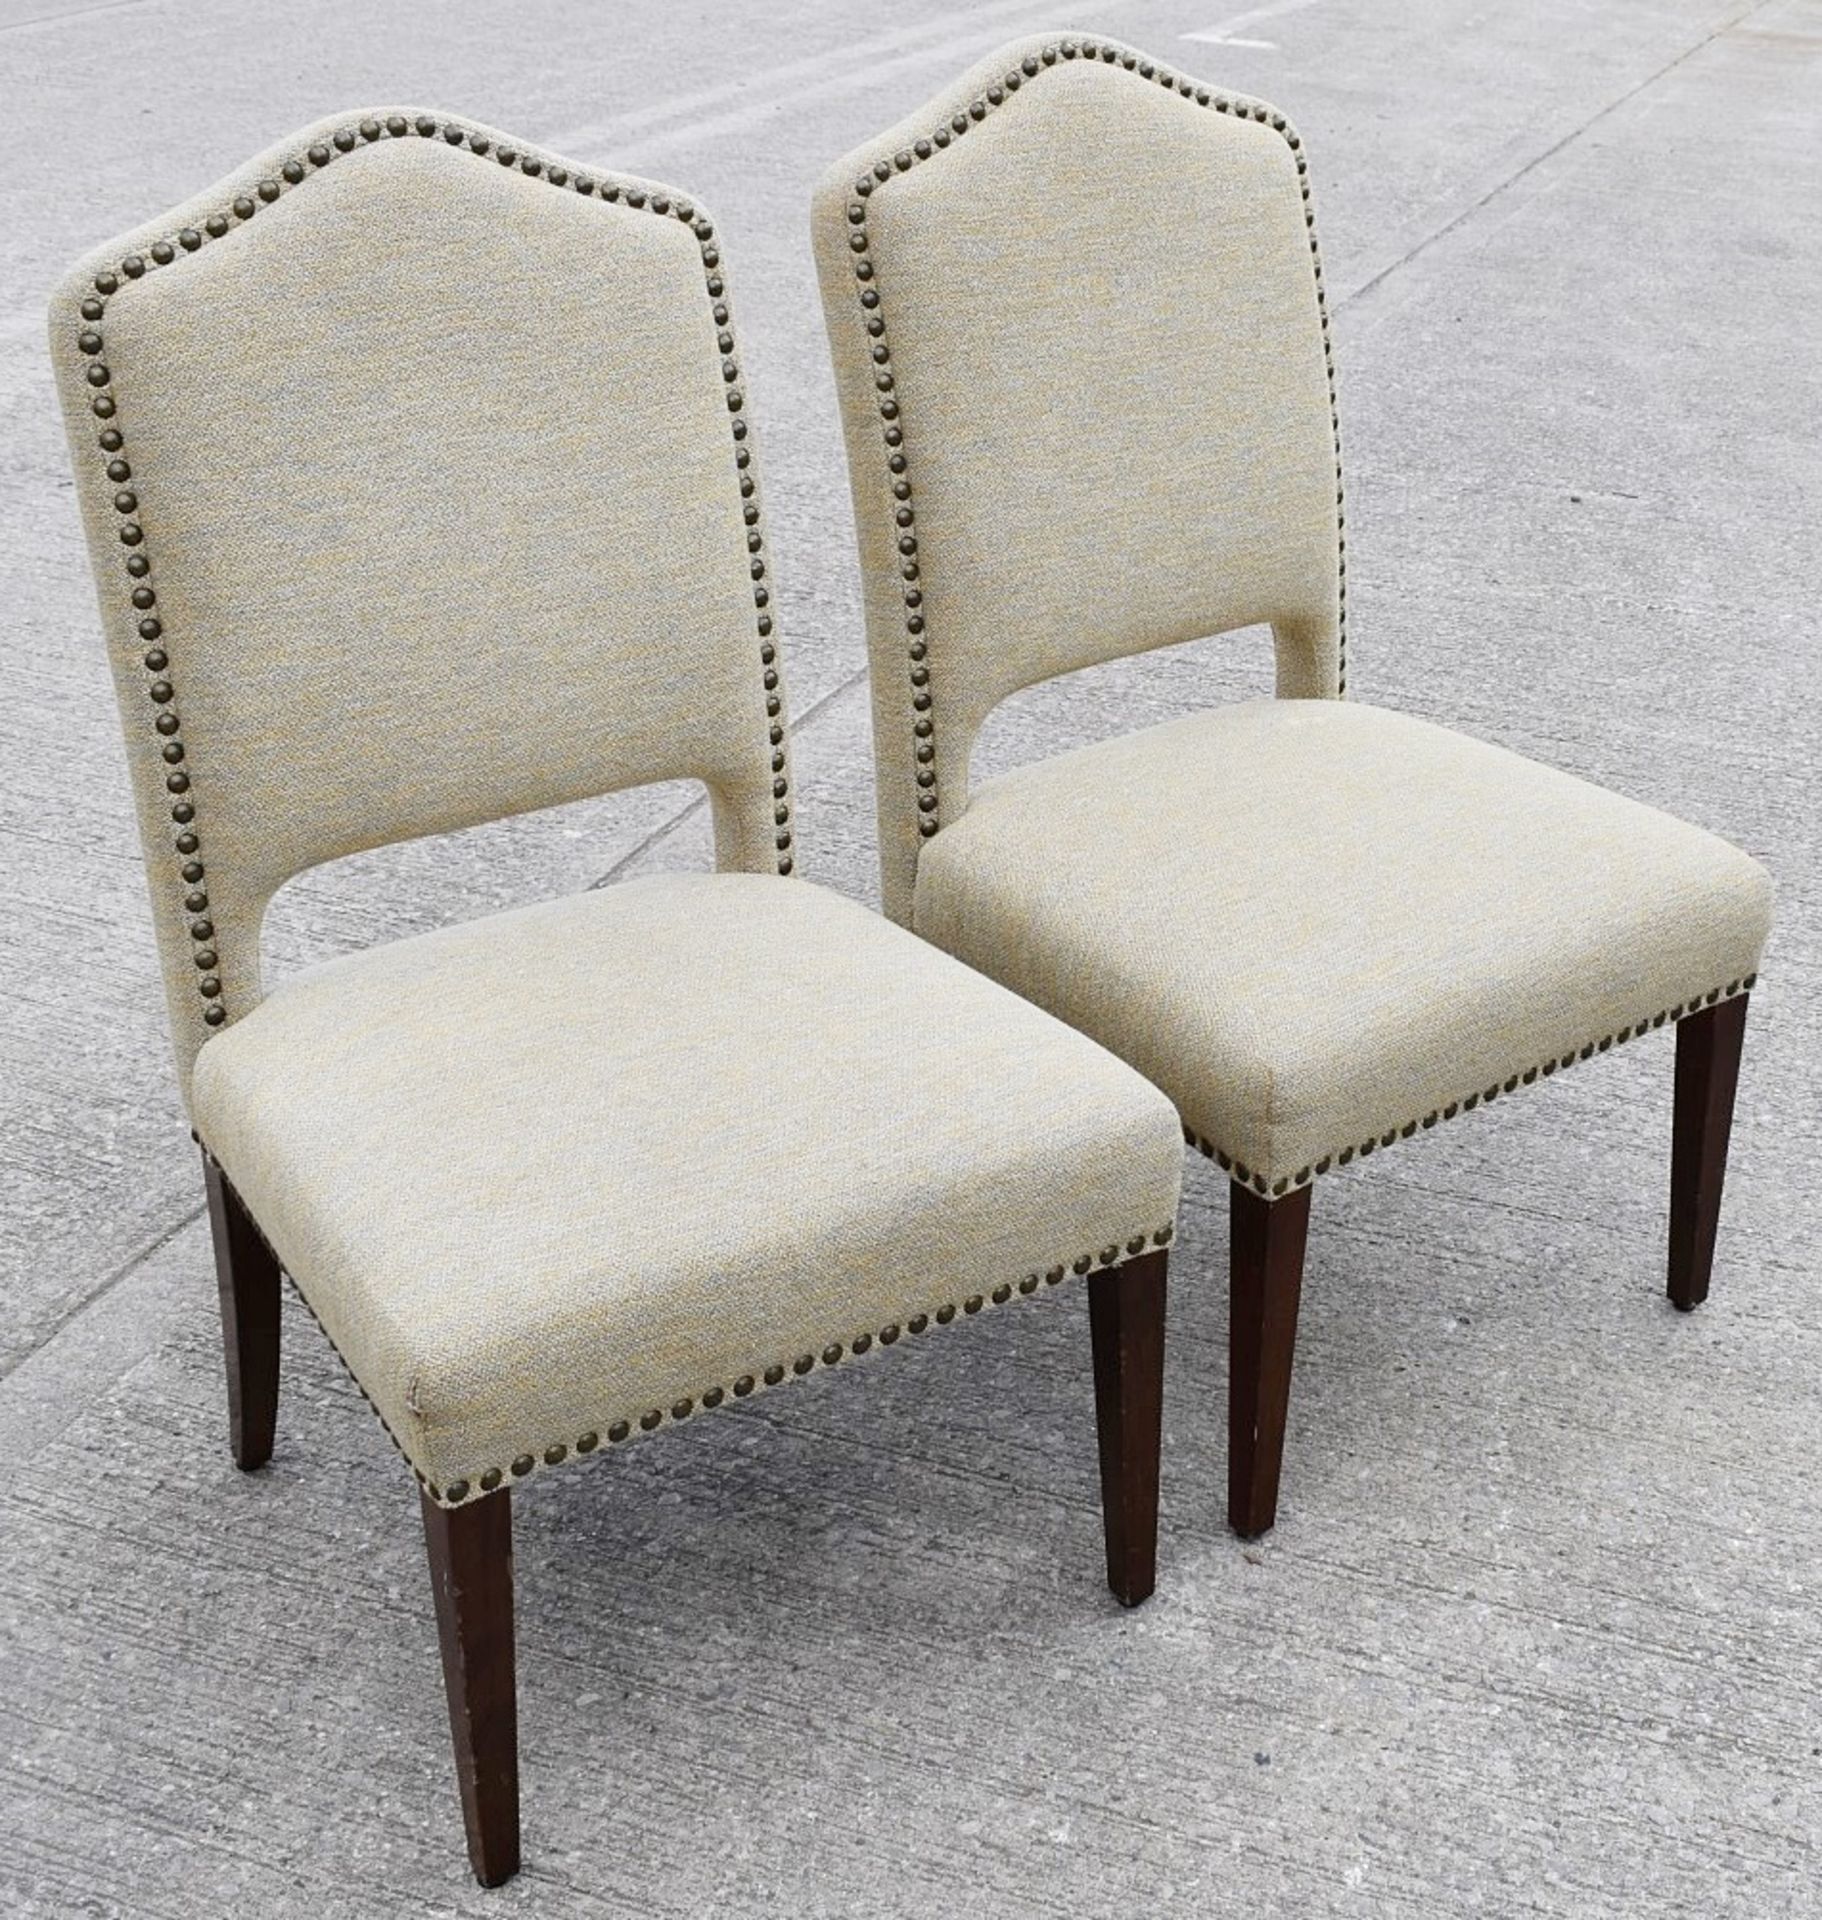 Pair Of Finely Crafted Studded Chairs Upholstered in a Premium Woven Fabric with Wooden Legs -